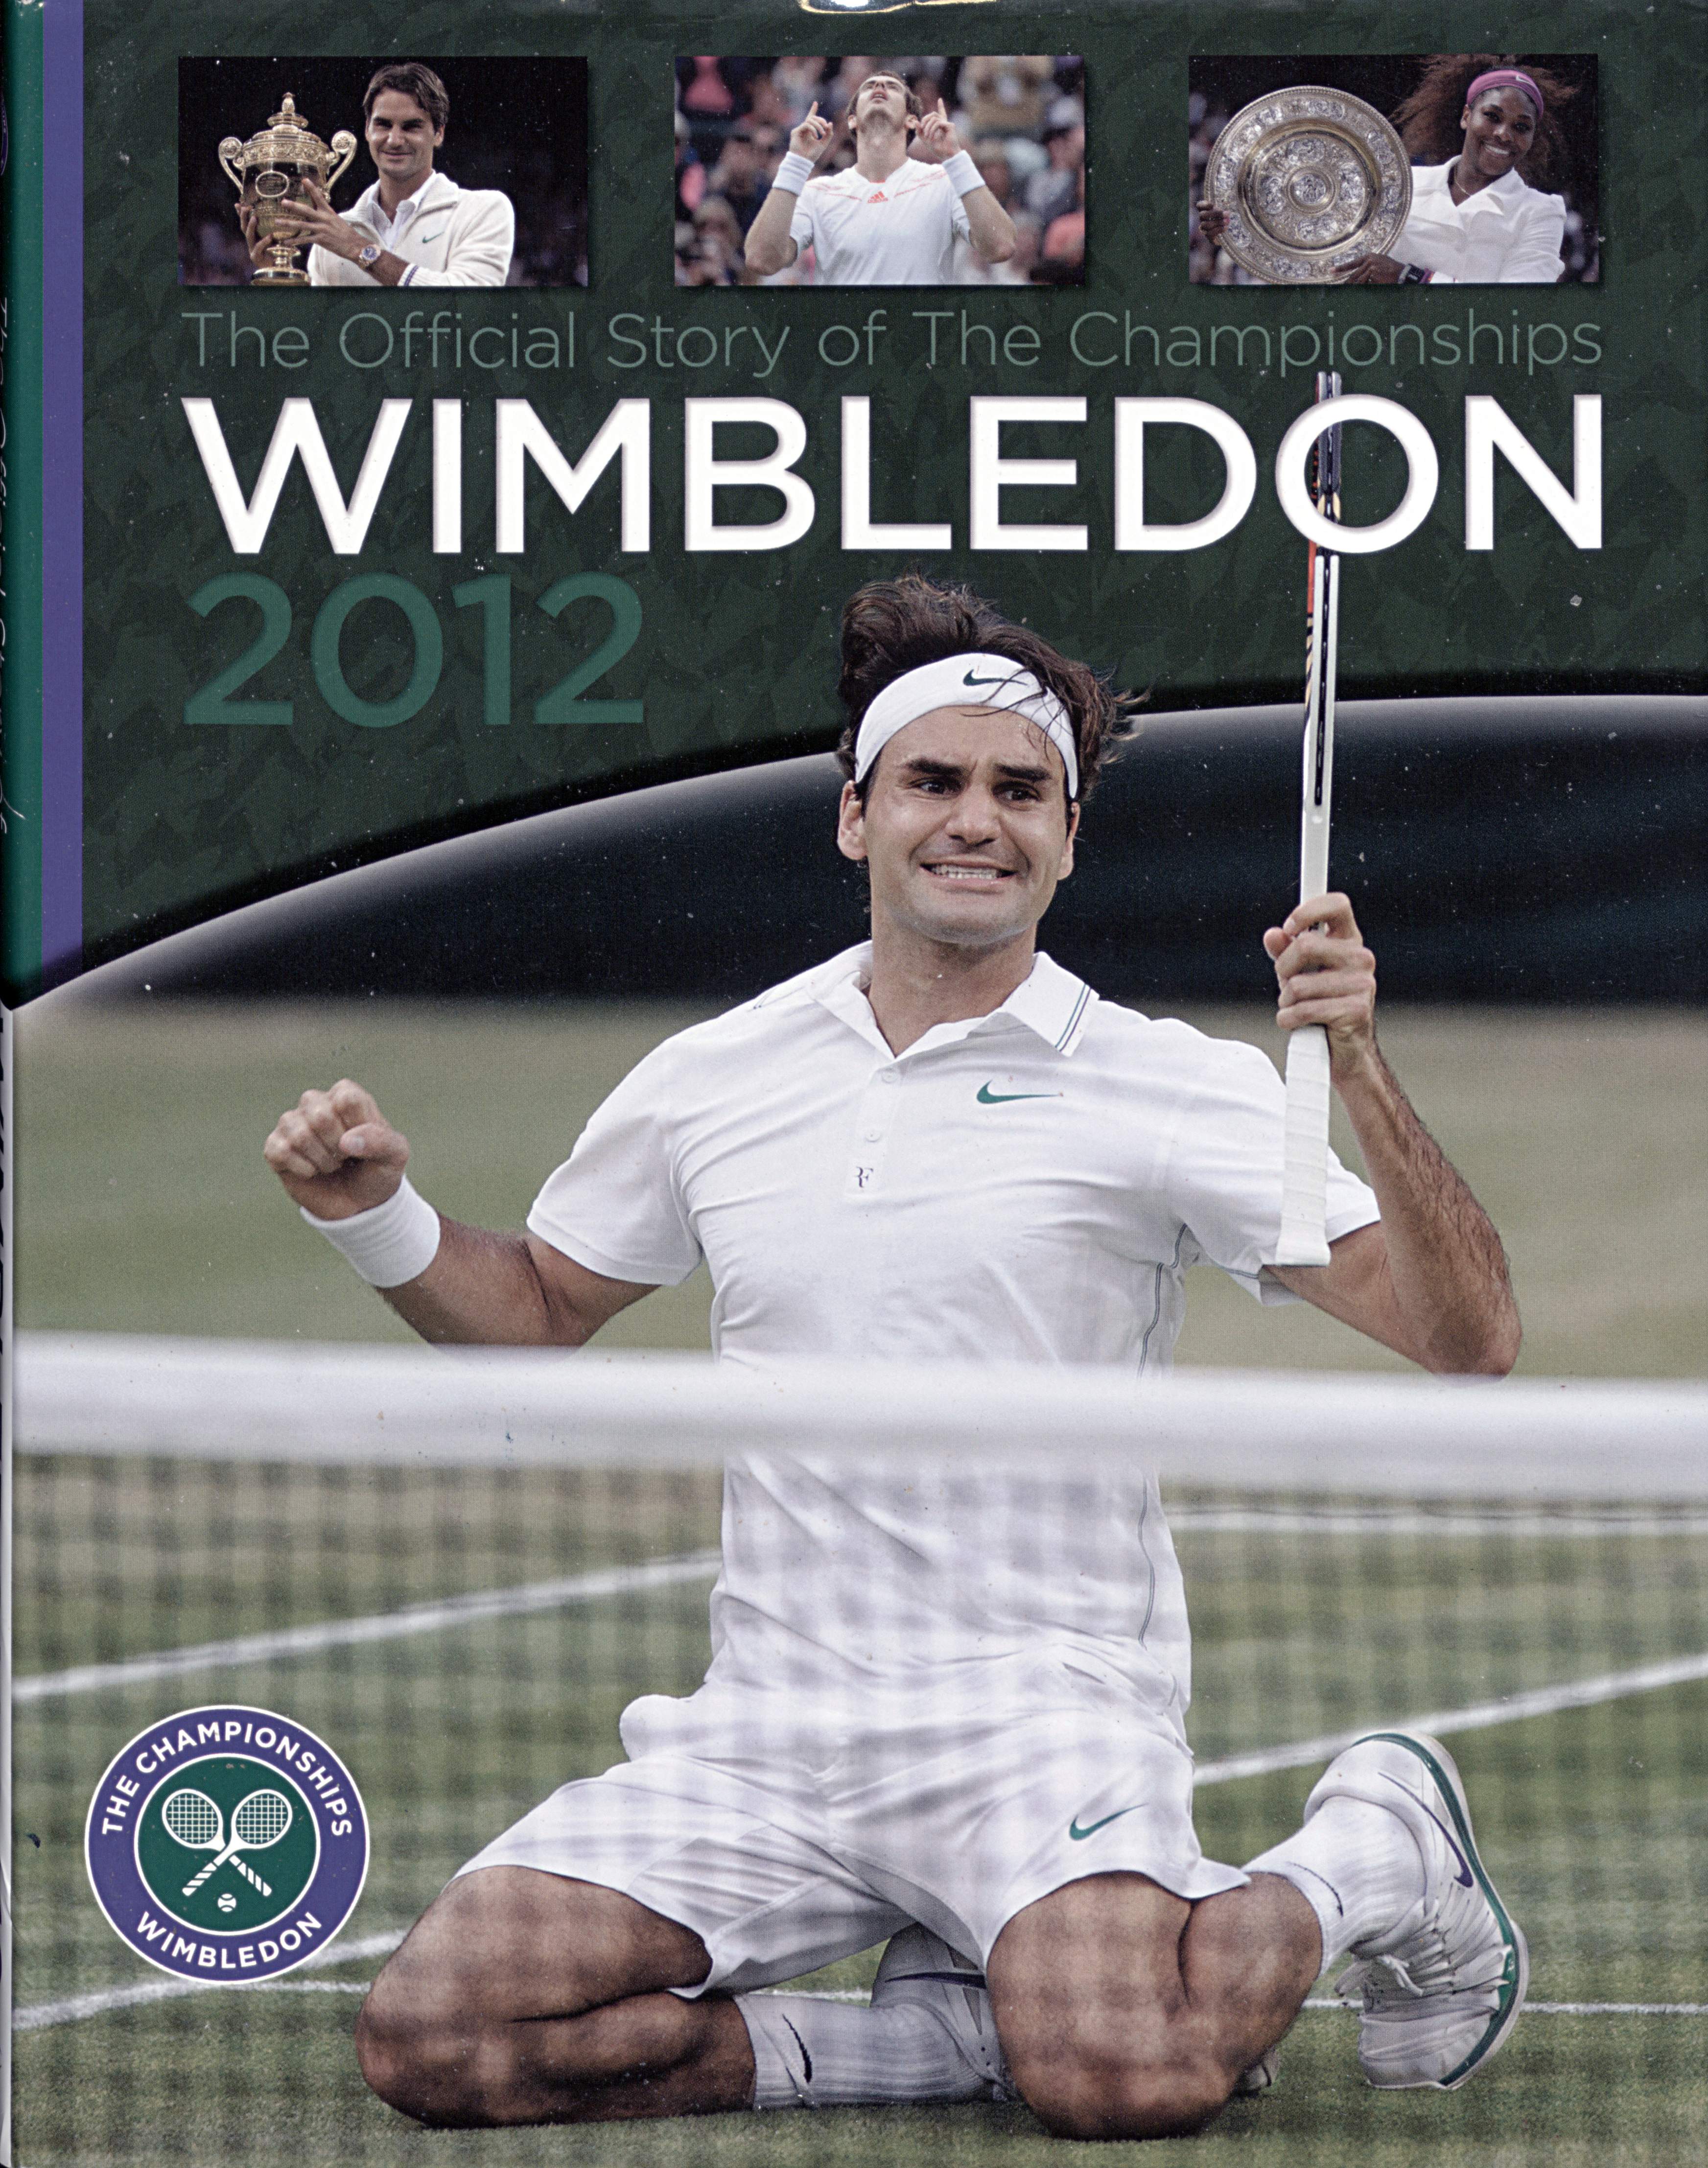 The Official Story of the Championships - Wimbledon 2012